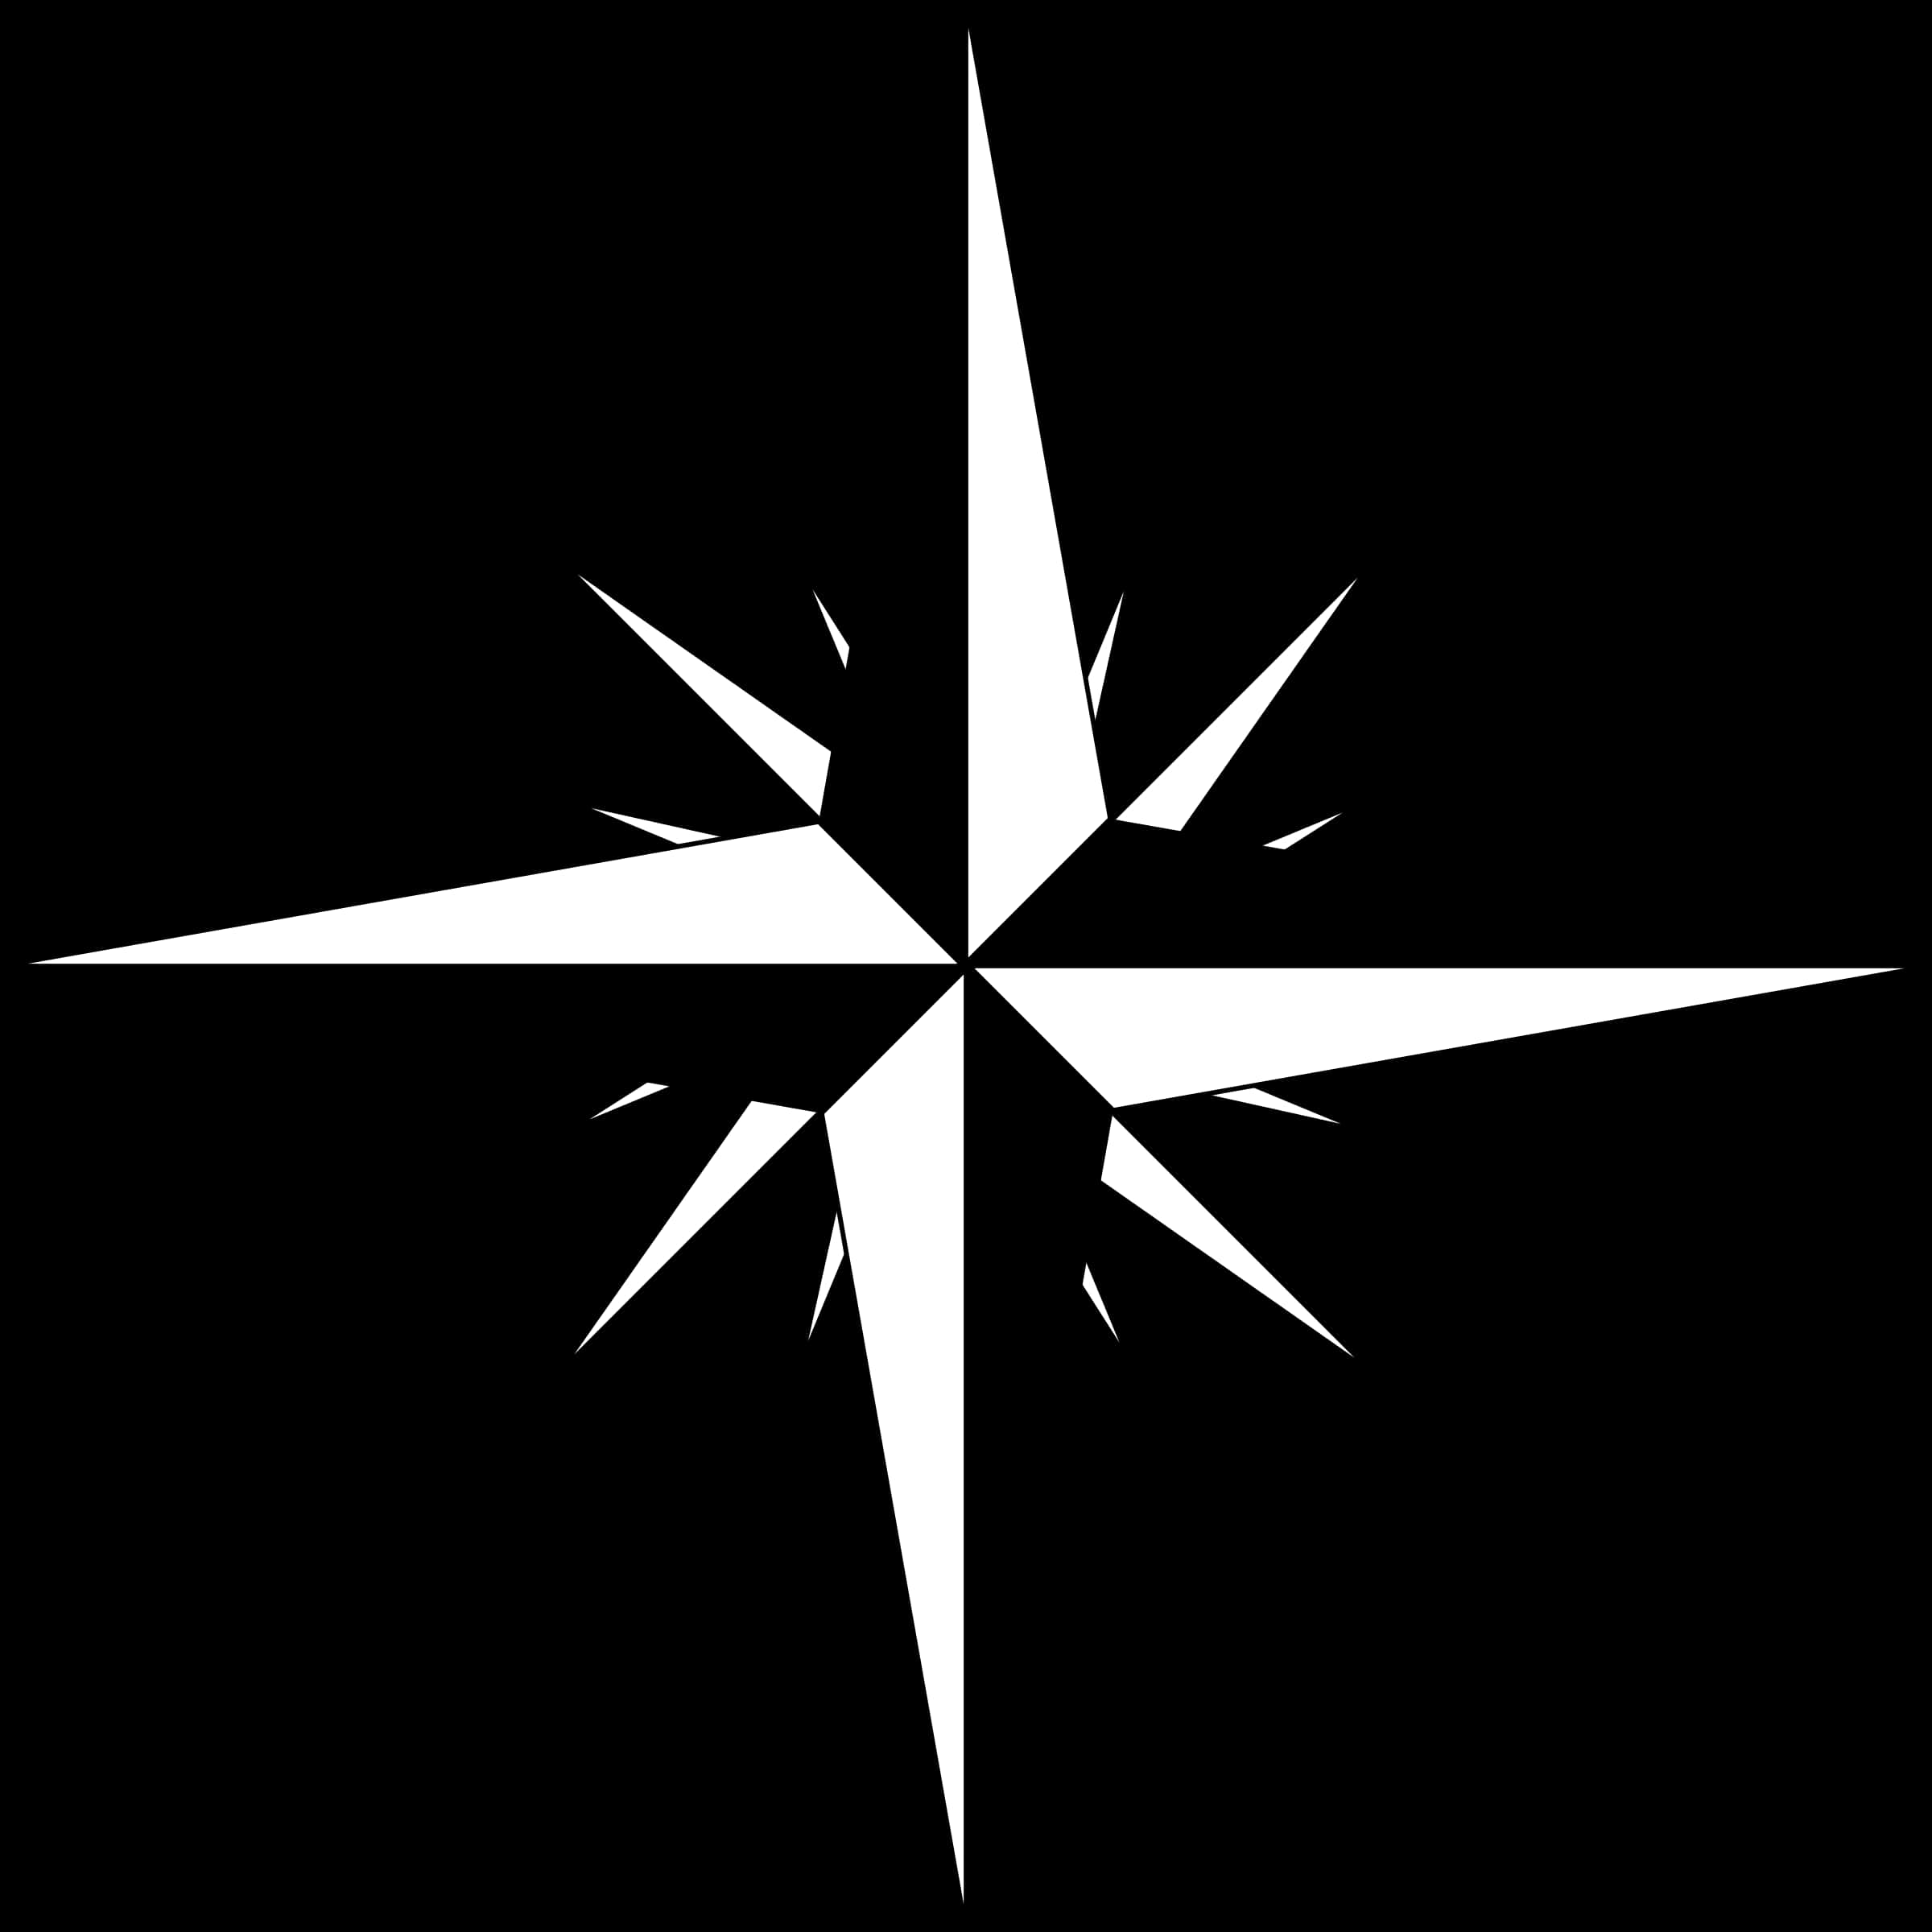 Compass Rose Graphic Blackand White PNG